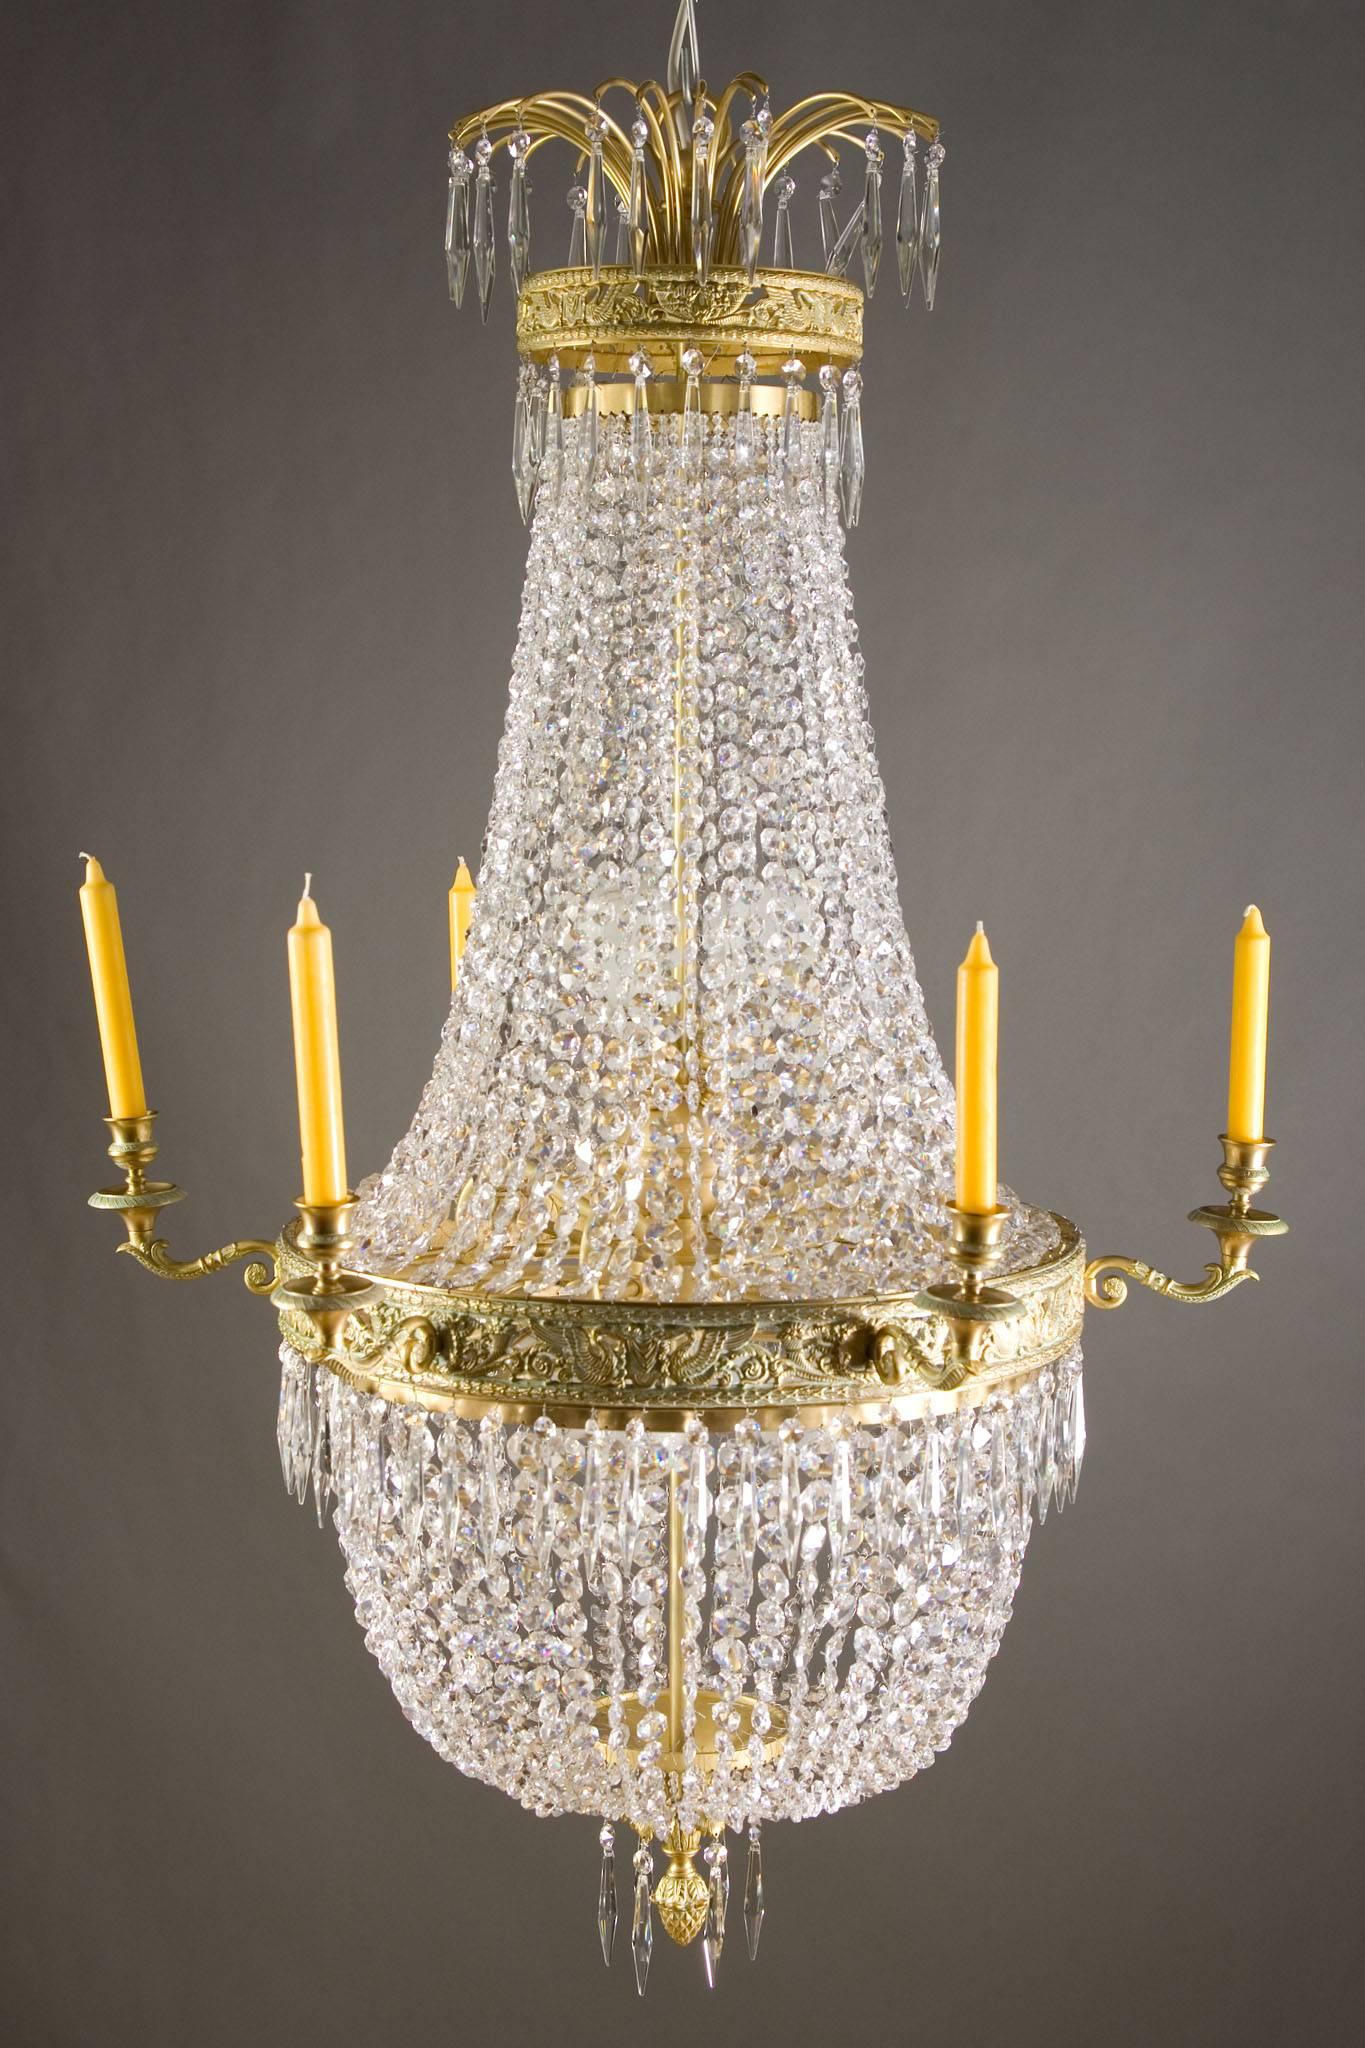 Classicist basket chandelier in Empire style.
Finely engraved Bronze. Adorned with engraved swans and pearl cords.

(F-Ra-19).